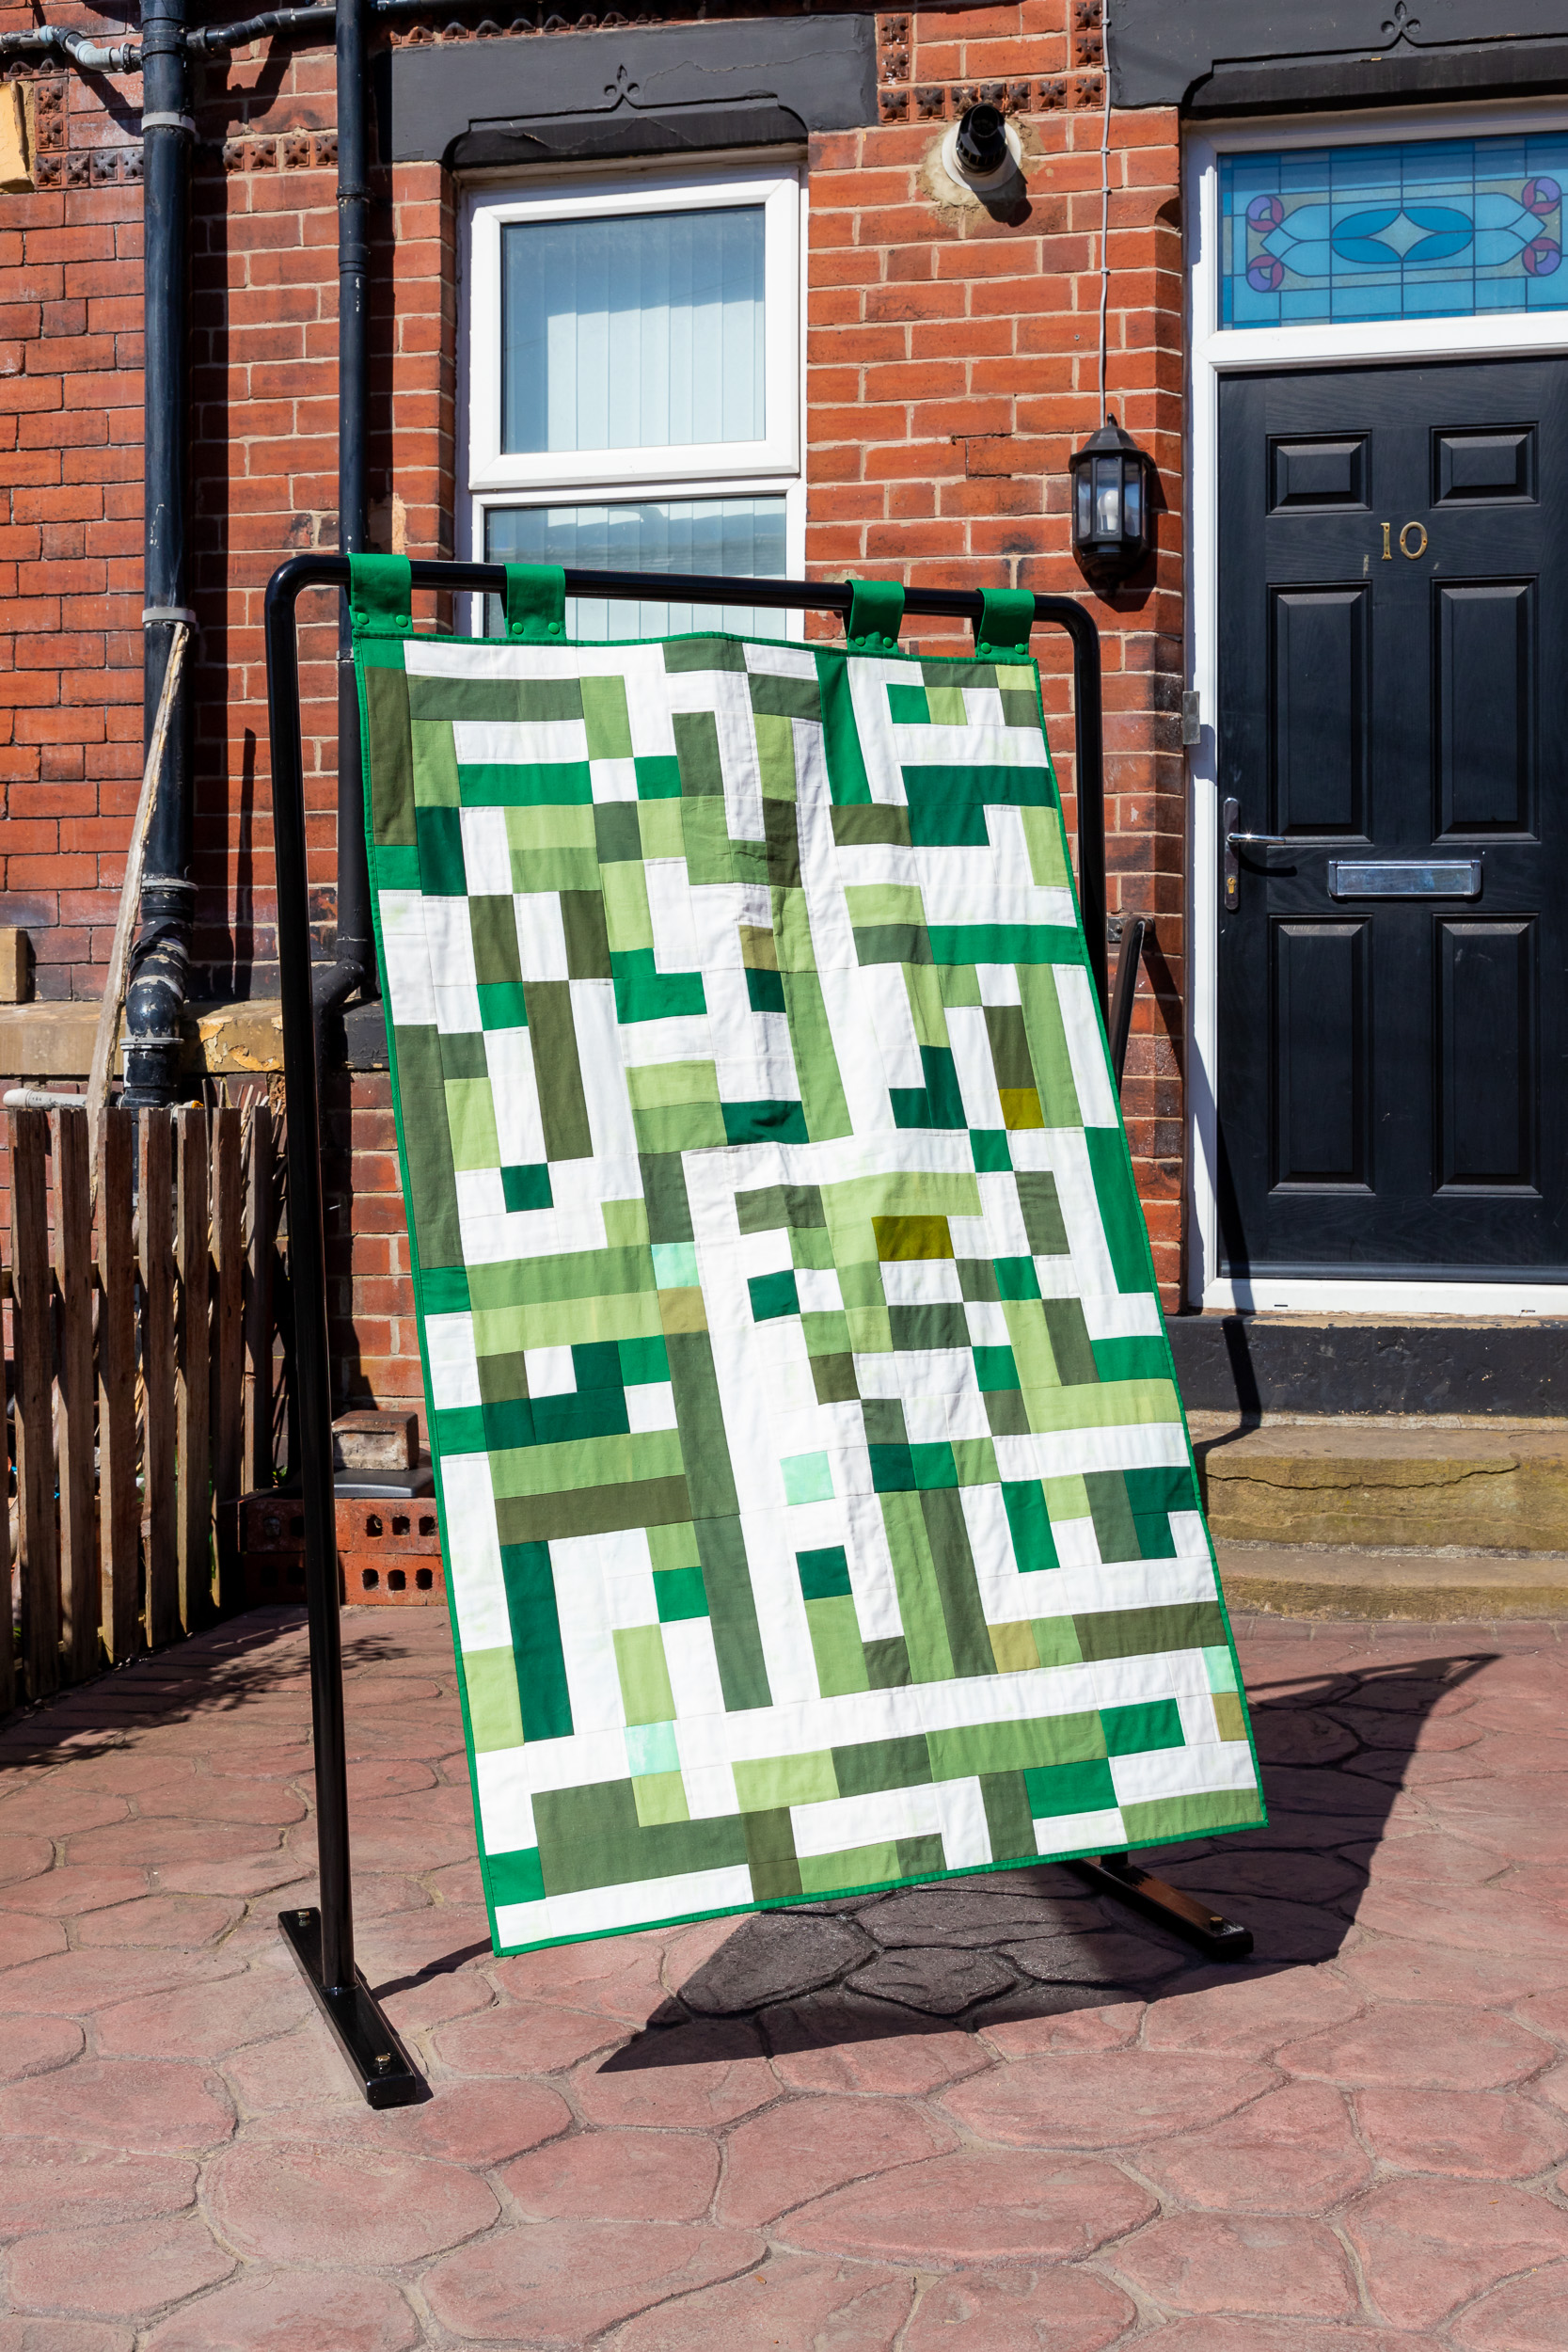 A geometric patterned textile is suspended in a black metal frame are in the paved back garden of a red-brick terraced house.